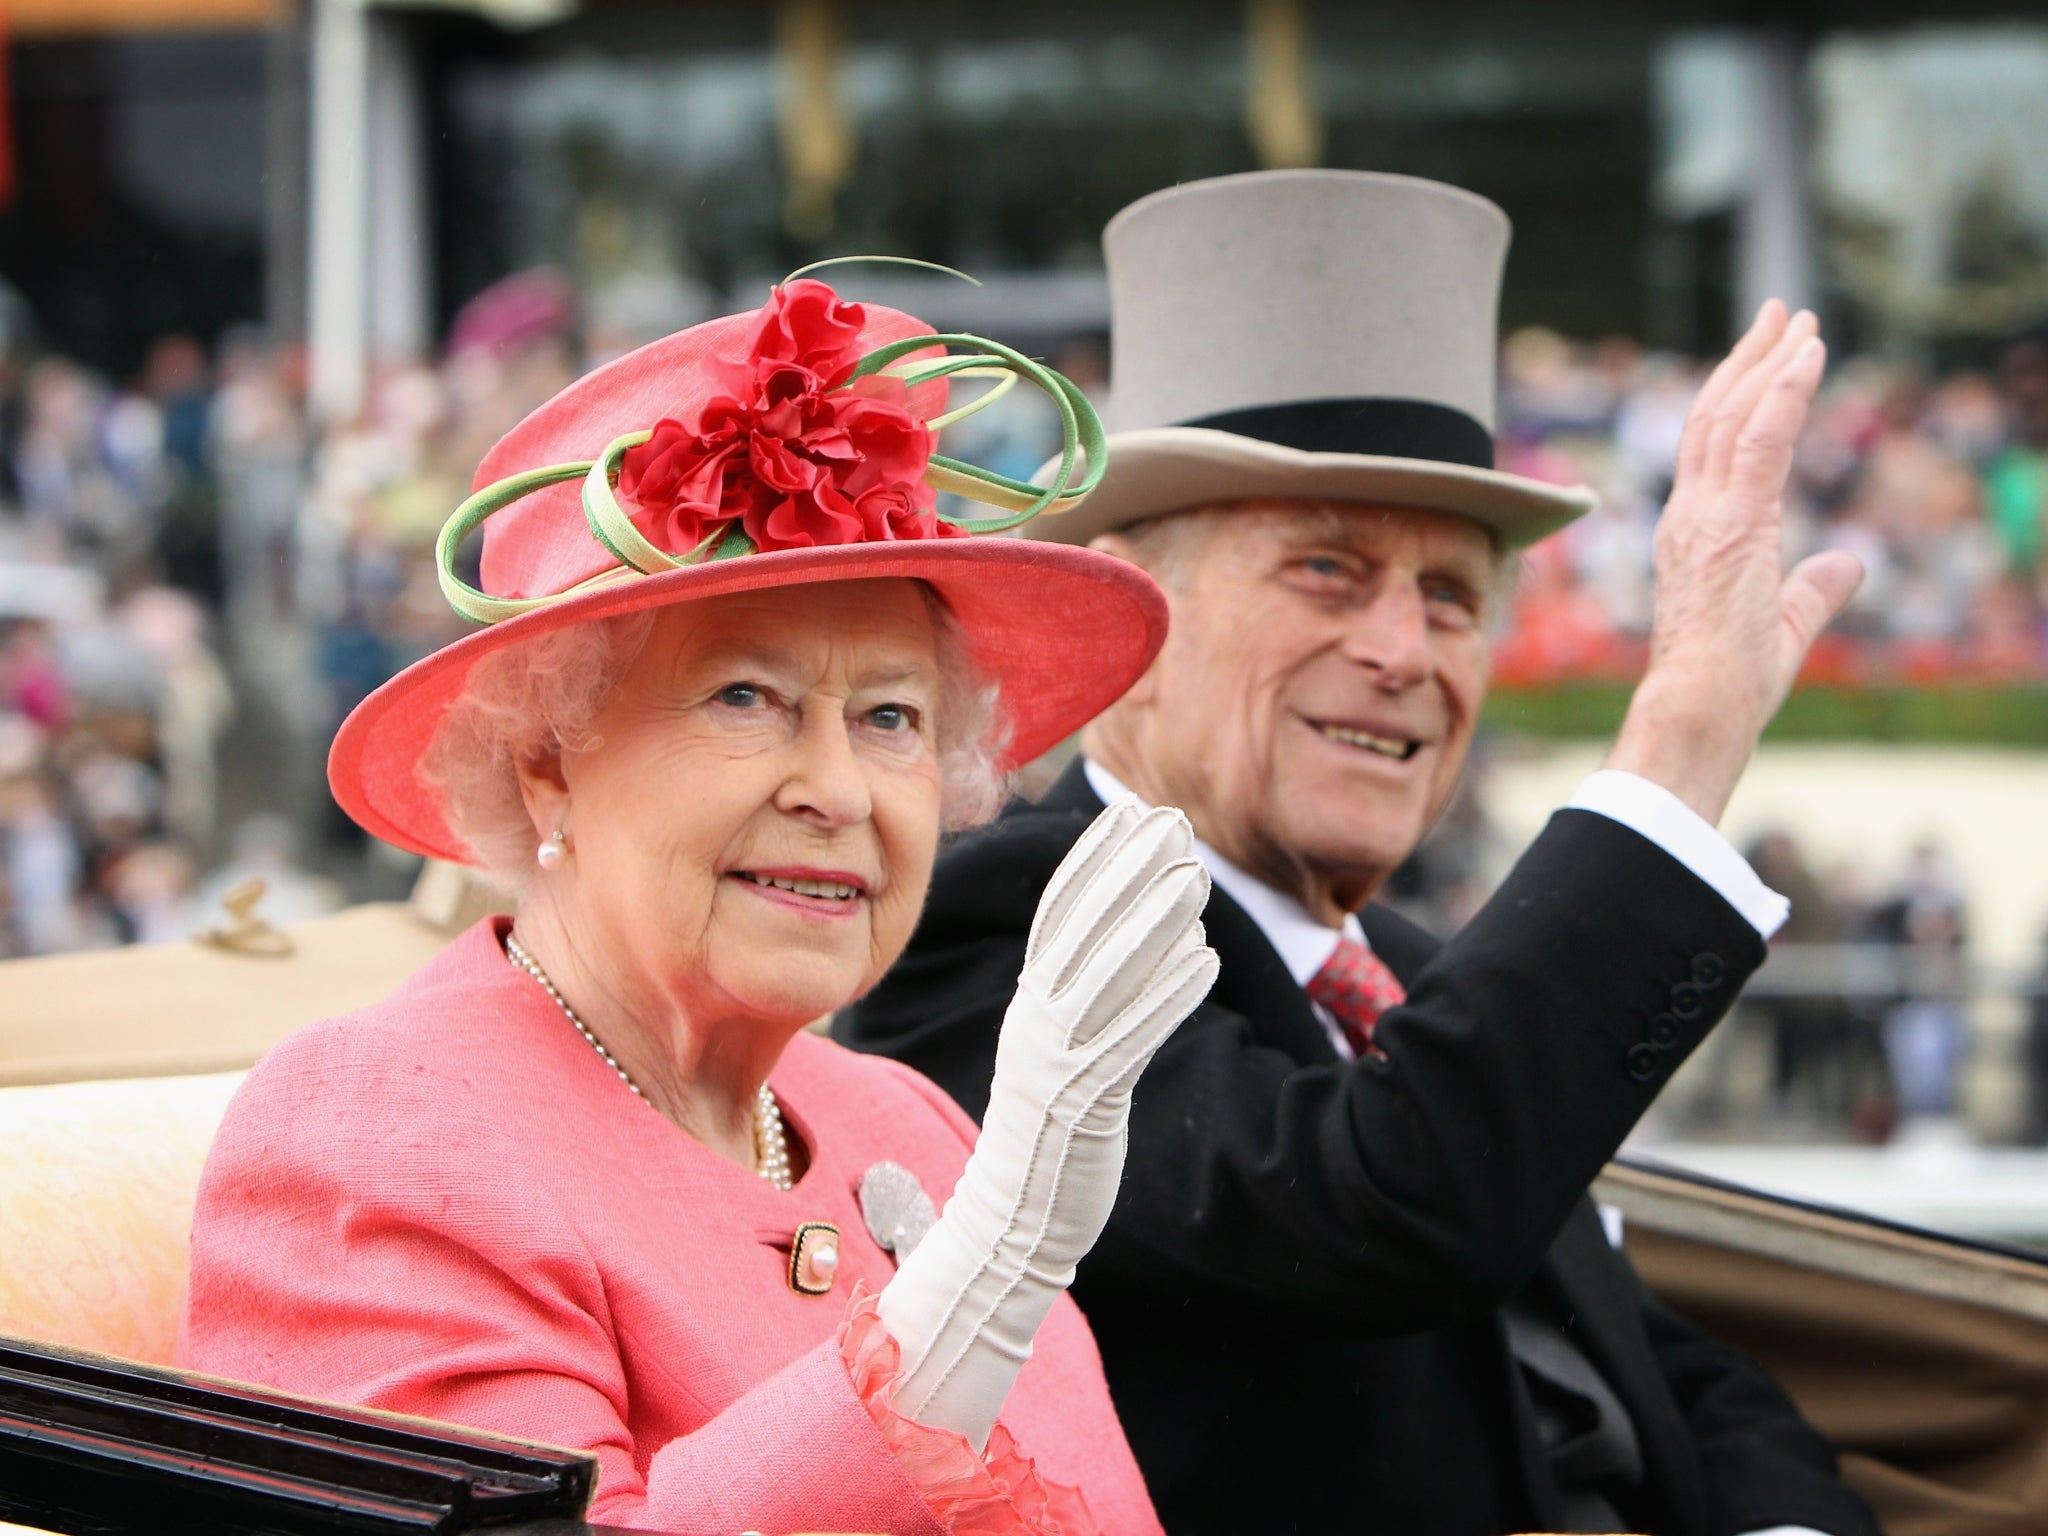 The Queen and Prince Philip in 2011